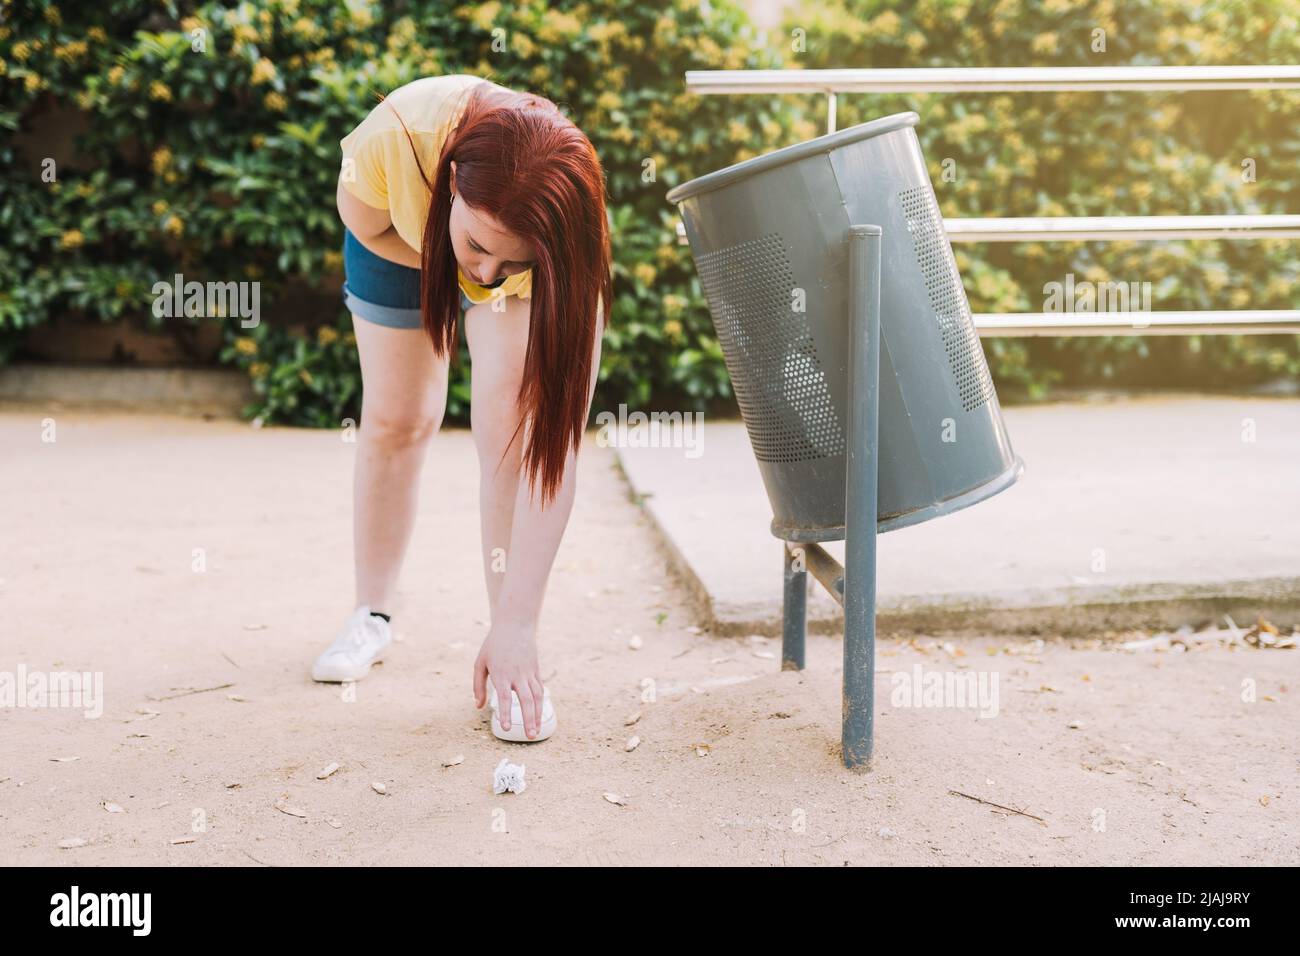 young woman bending down to pick up litter from the ground in a public park, to deposit it in a litter bin. young environmentalist in the city. Stock Photo